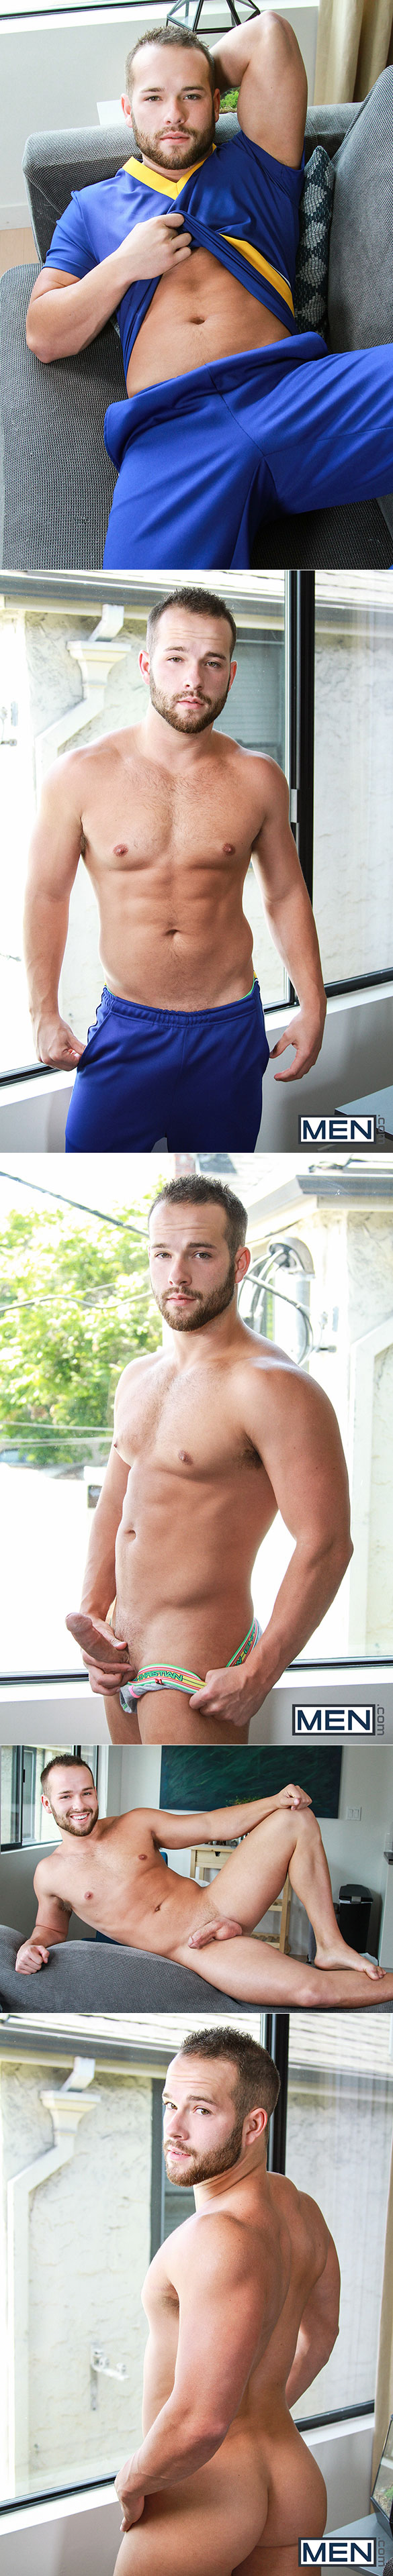 Men.com: Luke Adams and Will Braun fuck each other in "Trainer Confessions, Part 1"